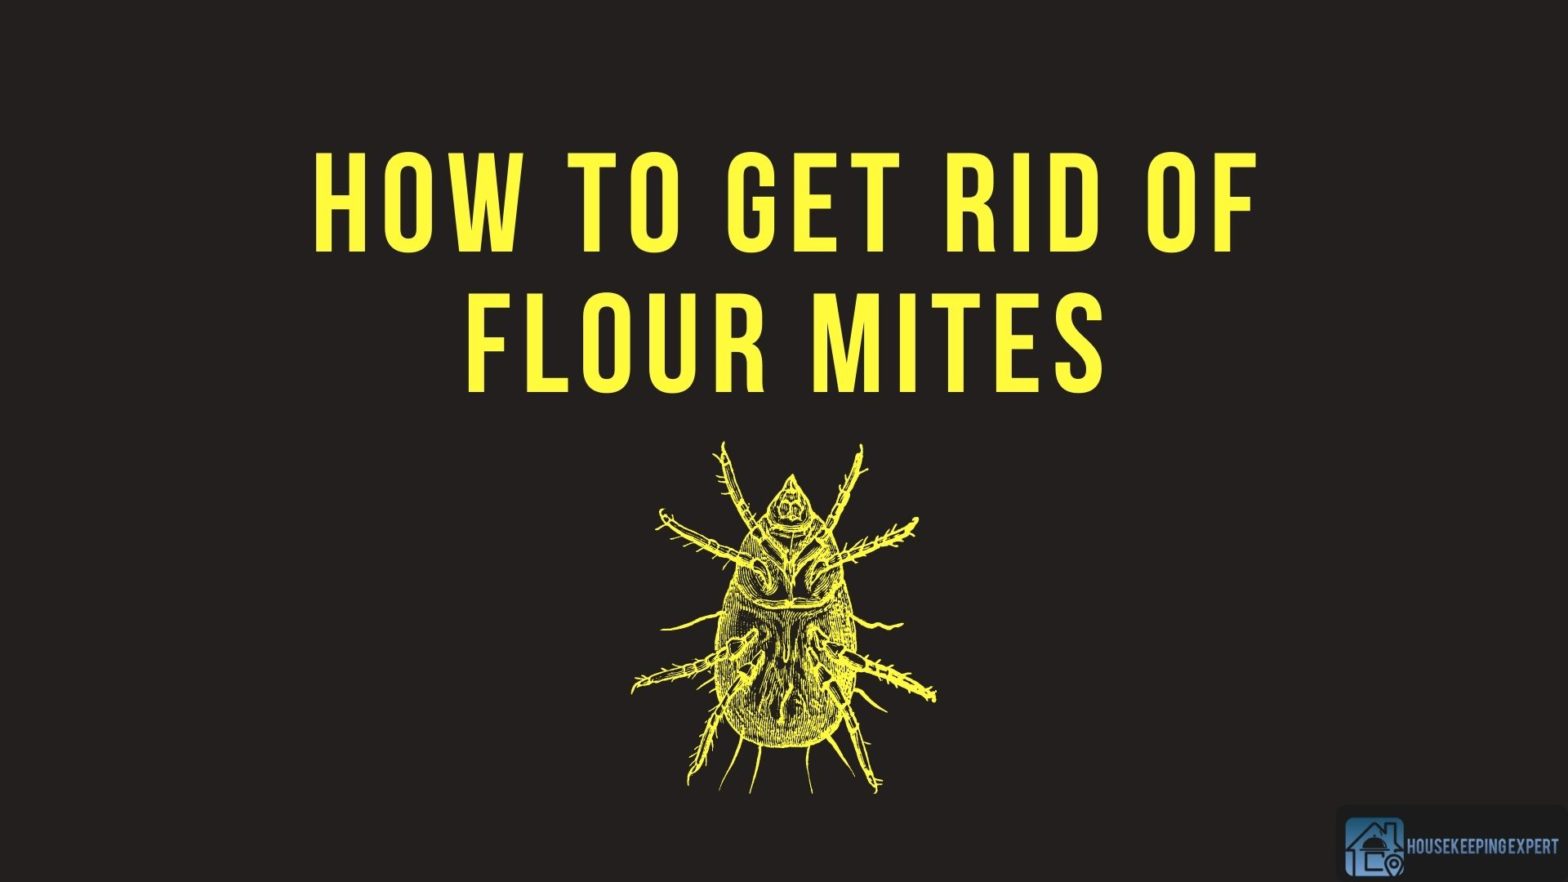 How To Get Rid Of Flour Mites